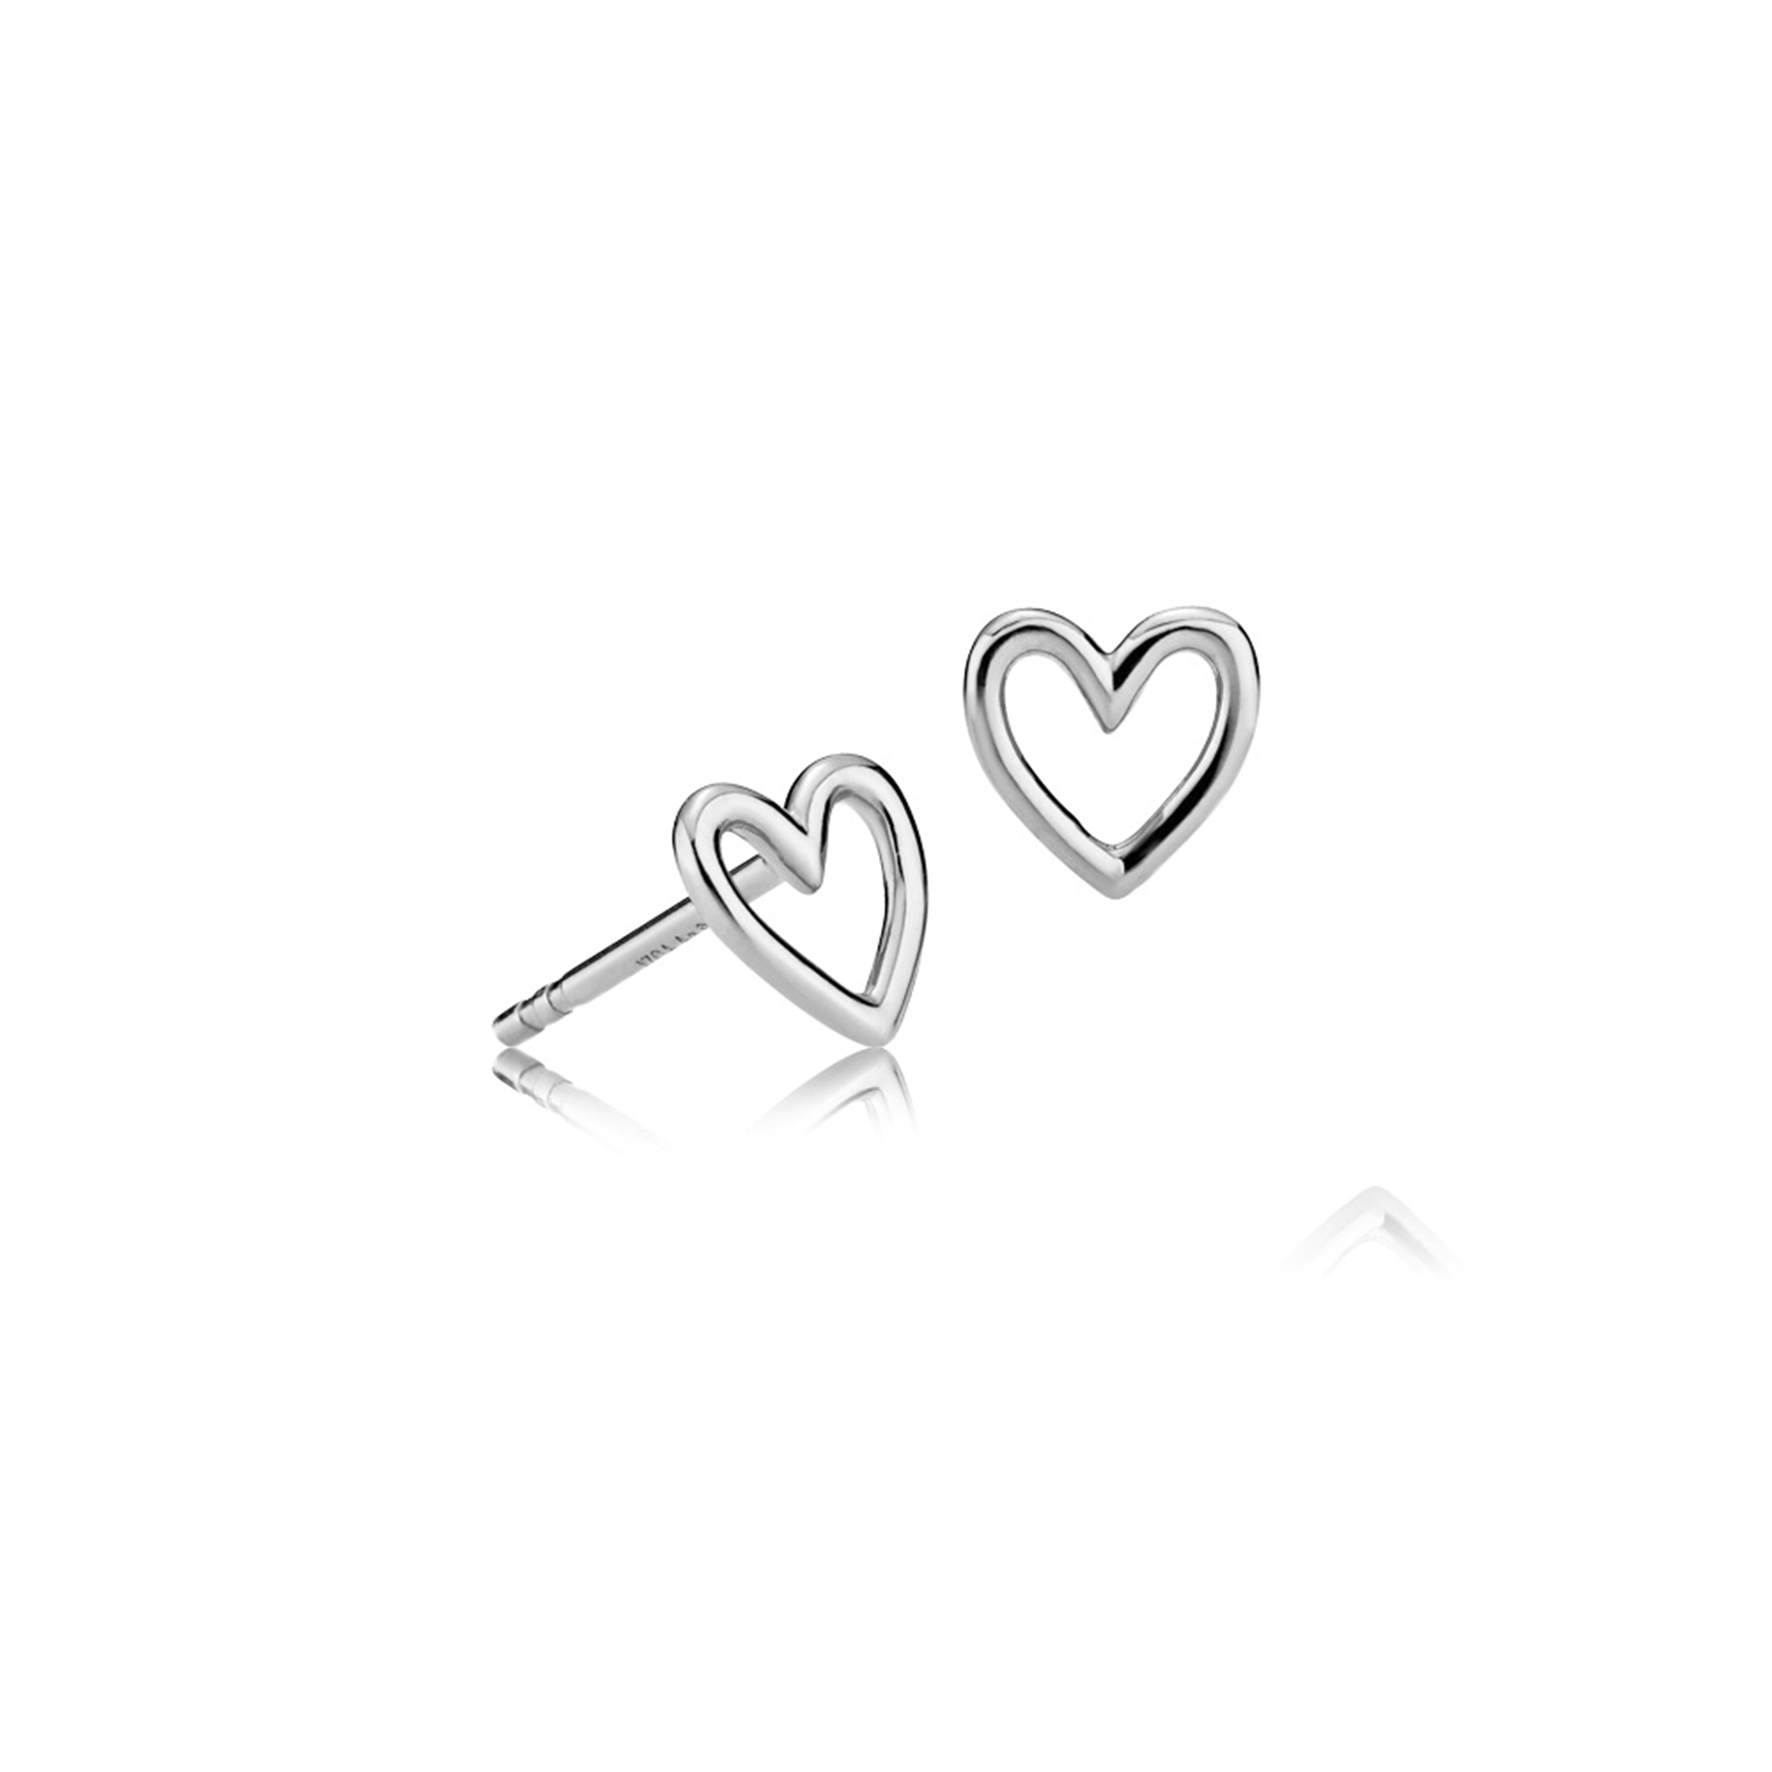 Love Charity Earsticks from Izabel Camille in Silver Sterling 925